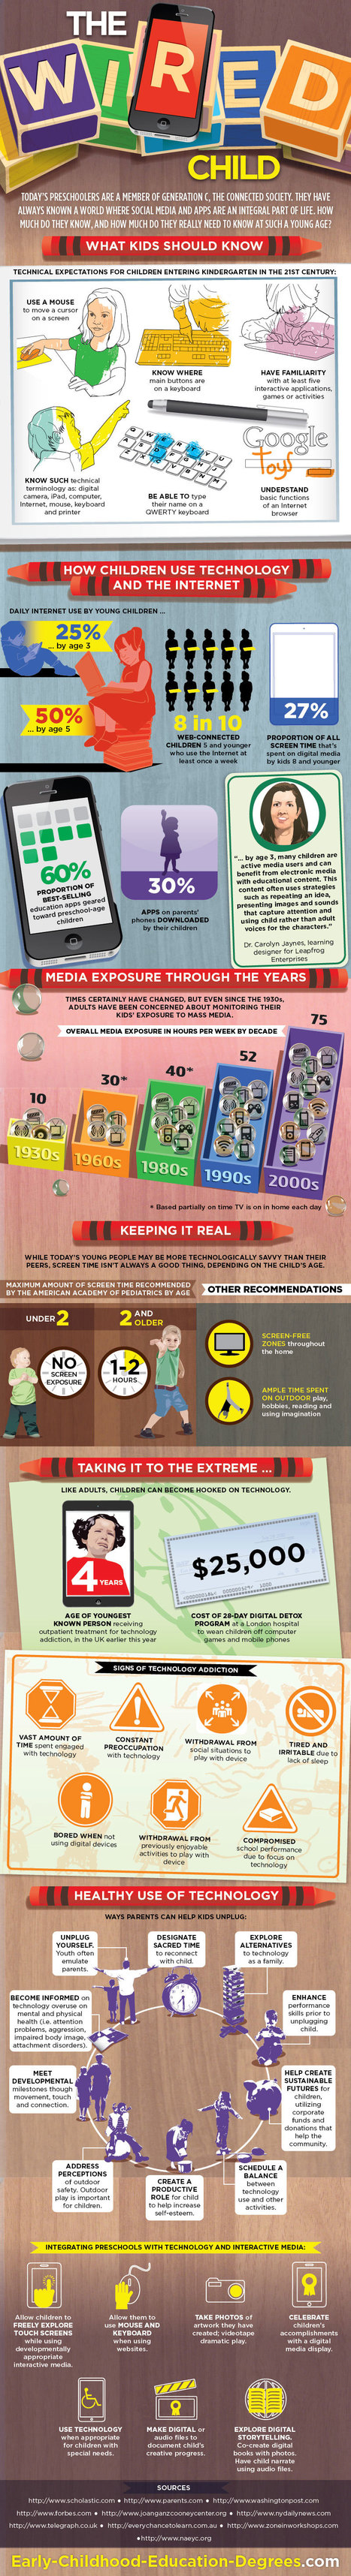 The Complete Visual Guide To Technology For Children [Infographic] | Web 2.0 for juandoming | Scoop.it